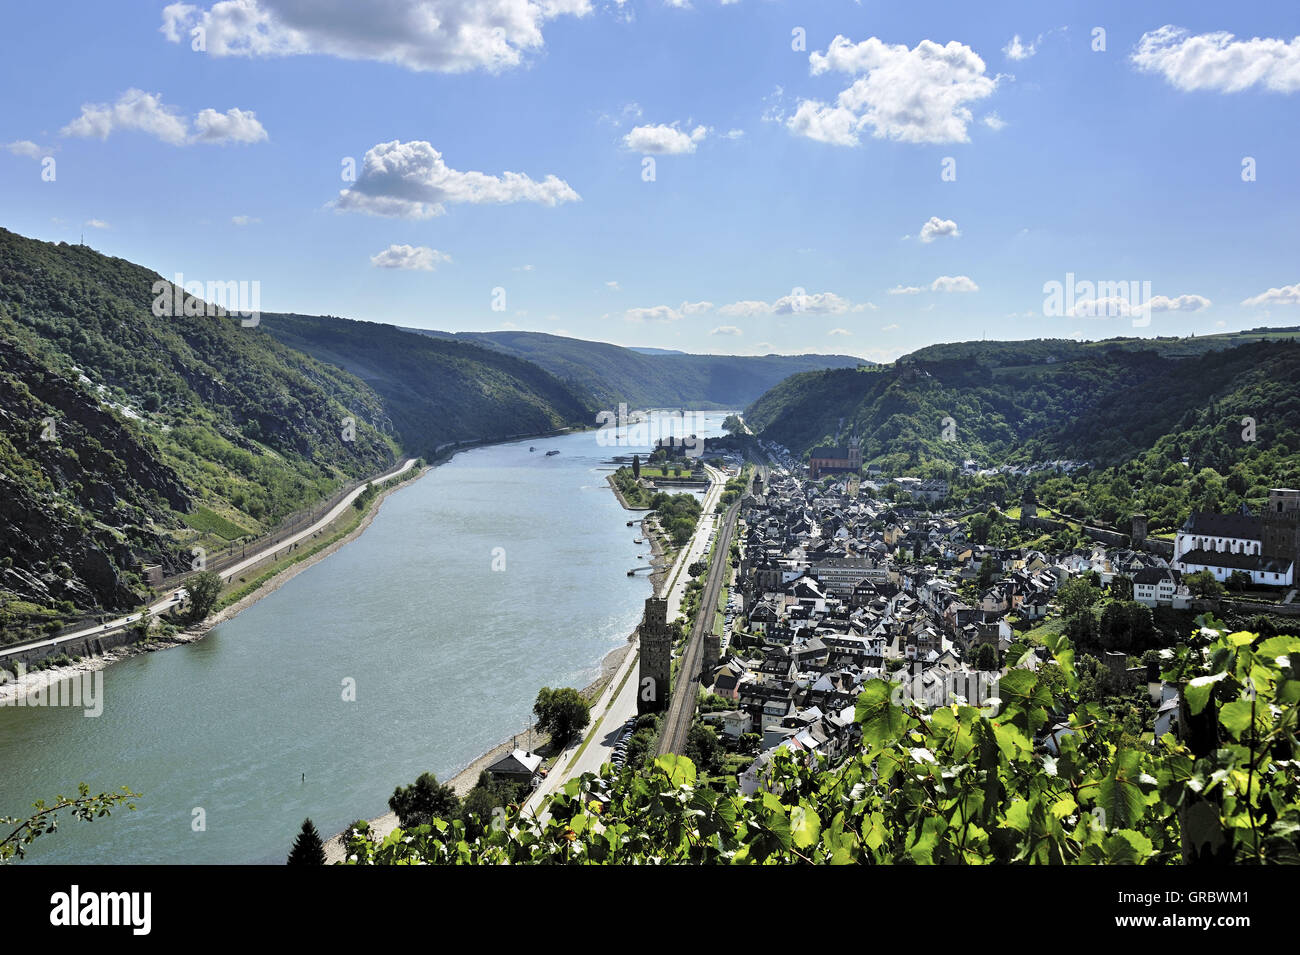 The Middle Rhine Valley With Town Oberwesel, Upper Middle Rhine Valley, Germany Stock Photo